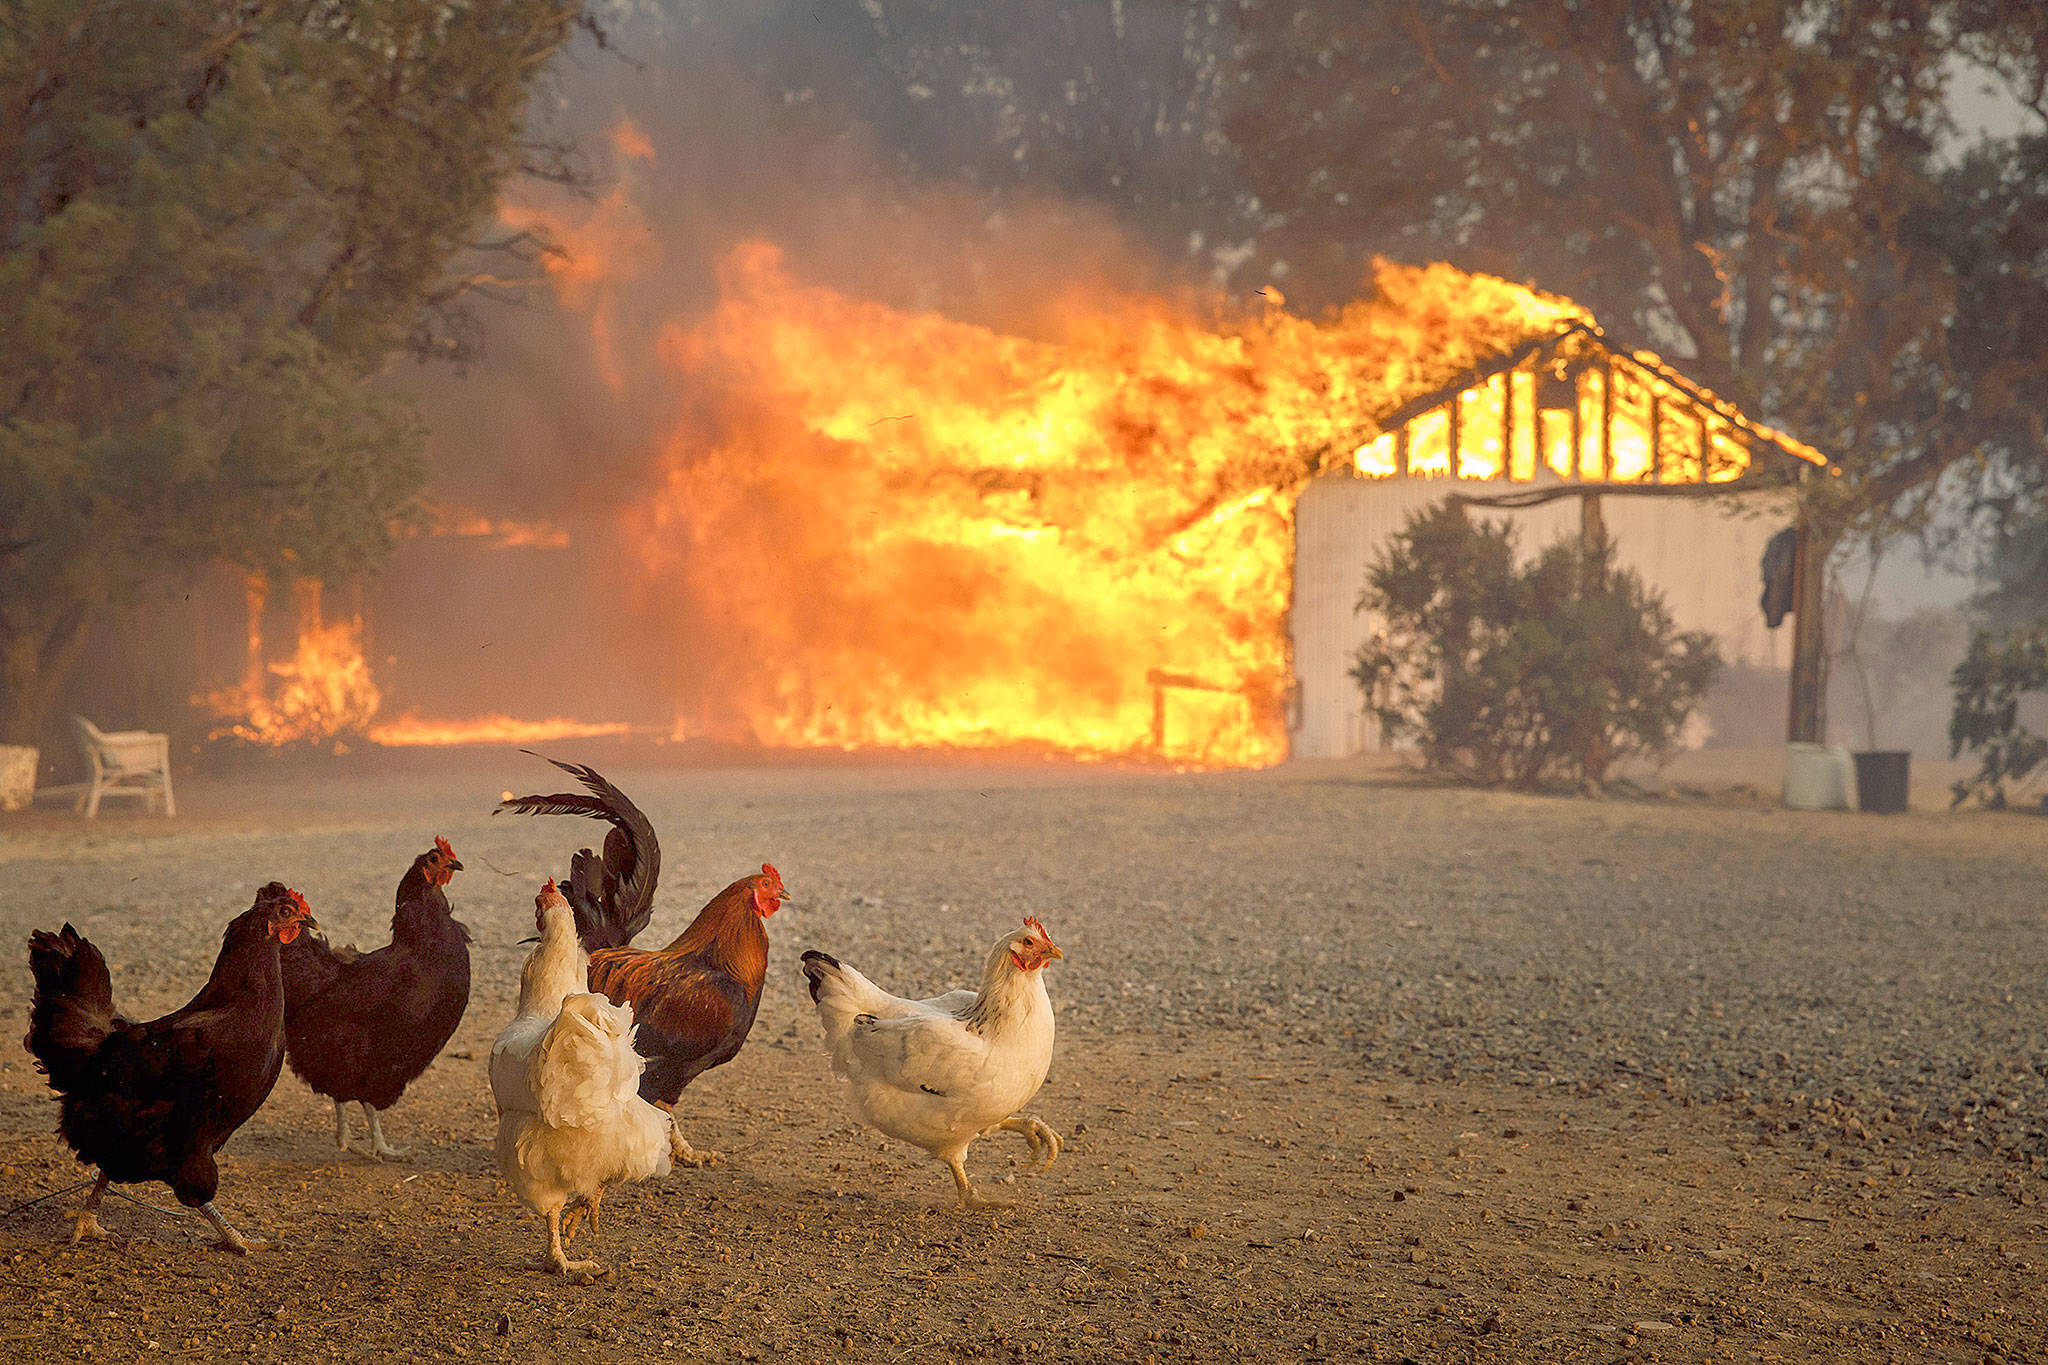 Chickens watch as a home is destroyed by the River Fire in a neighborhood near Lakeport, Calif., on Tuesday. (Marcus Yam/Los Angeles Times)